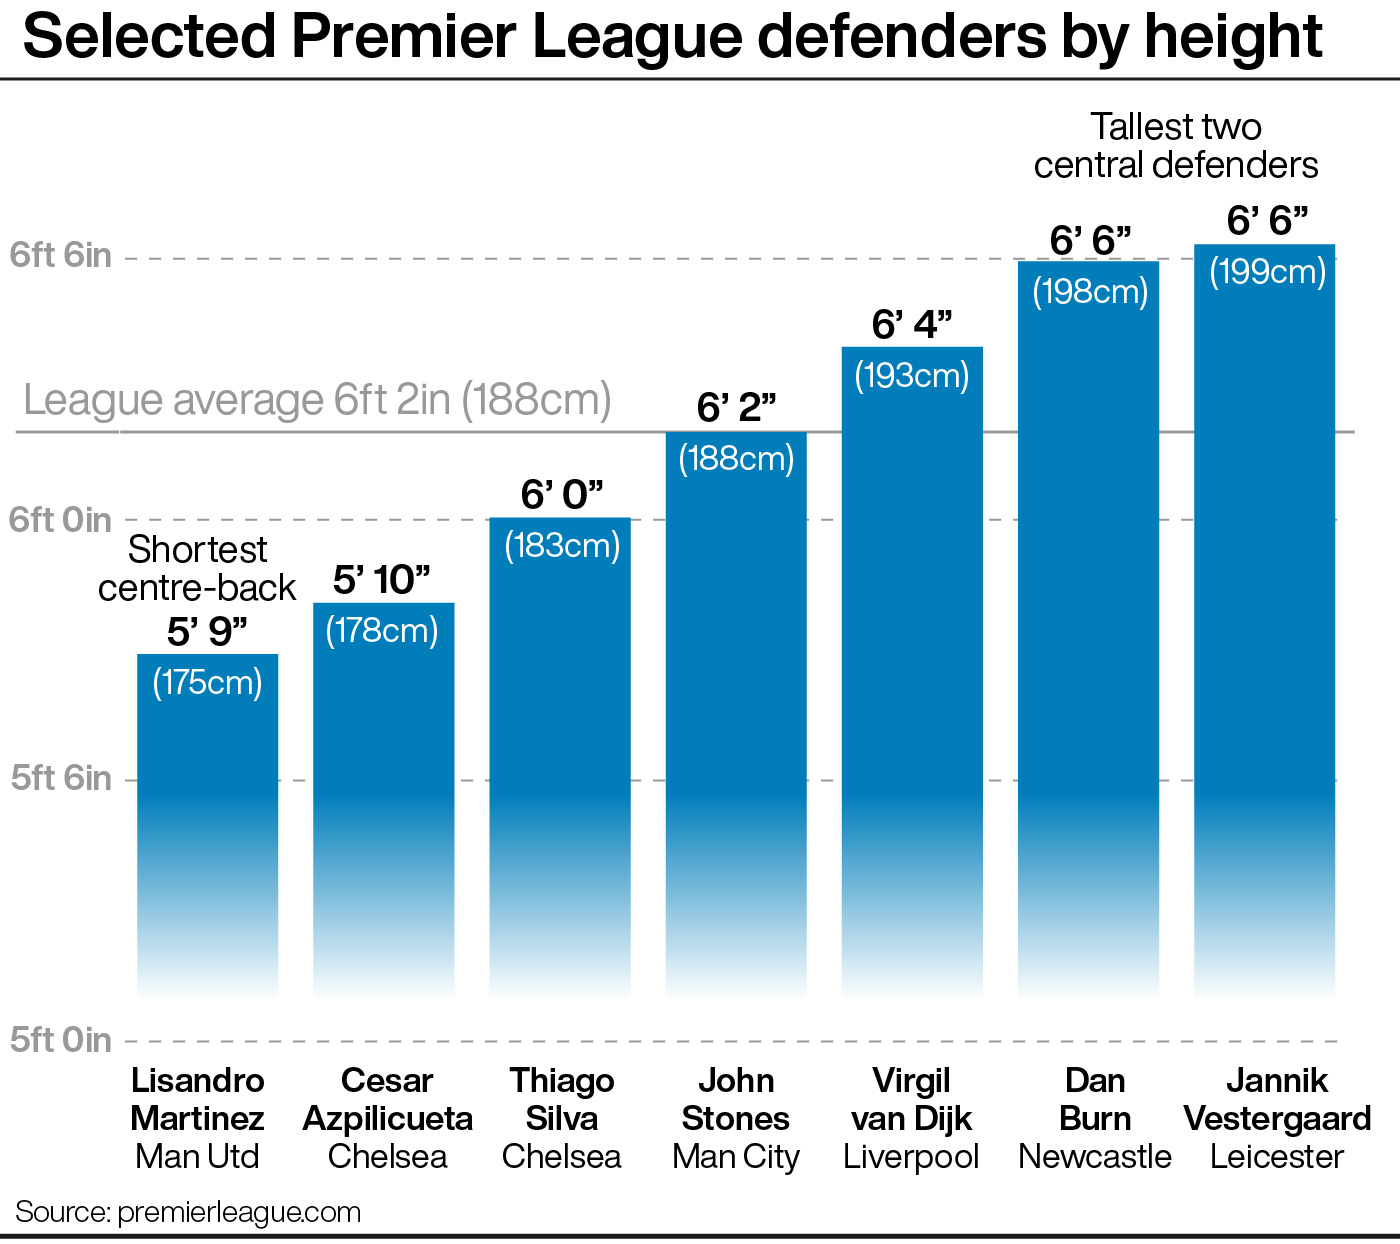 Selected Premier League defenders by height